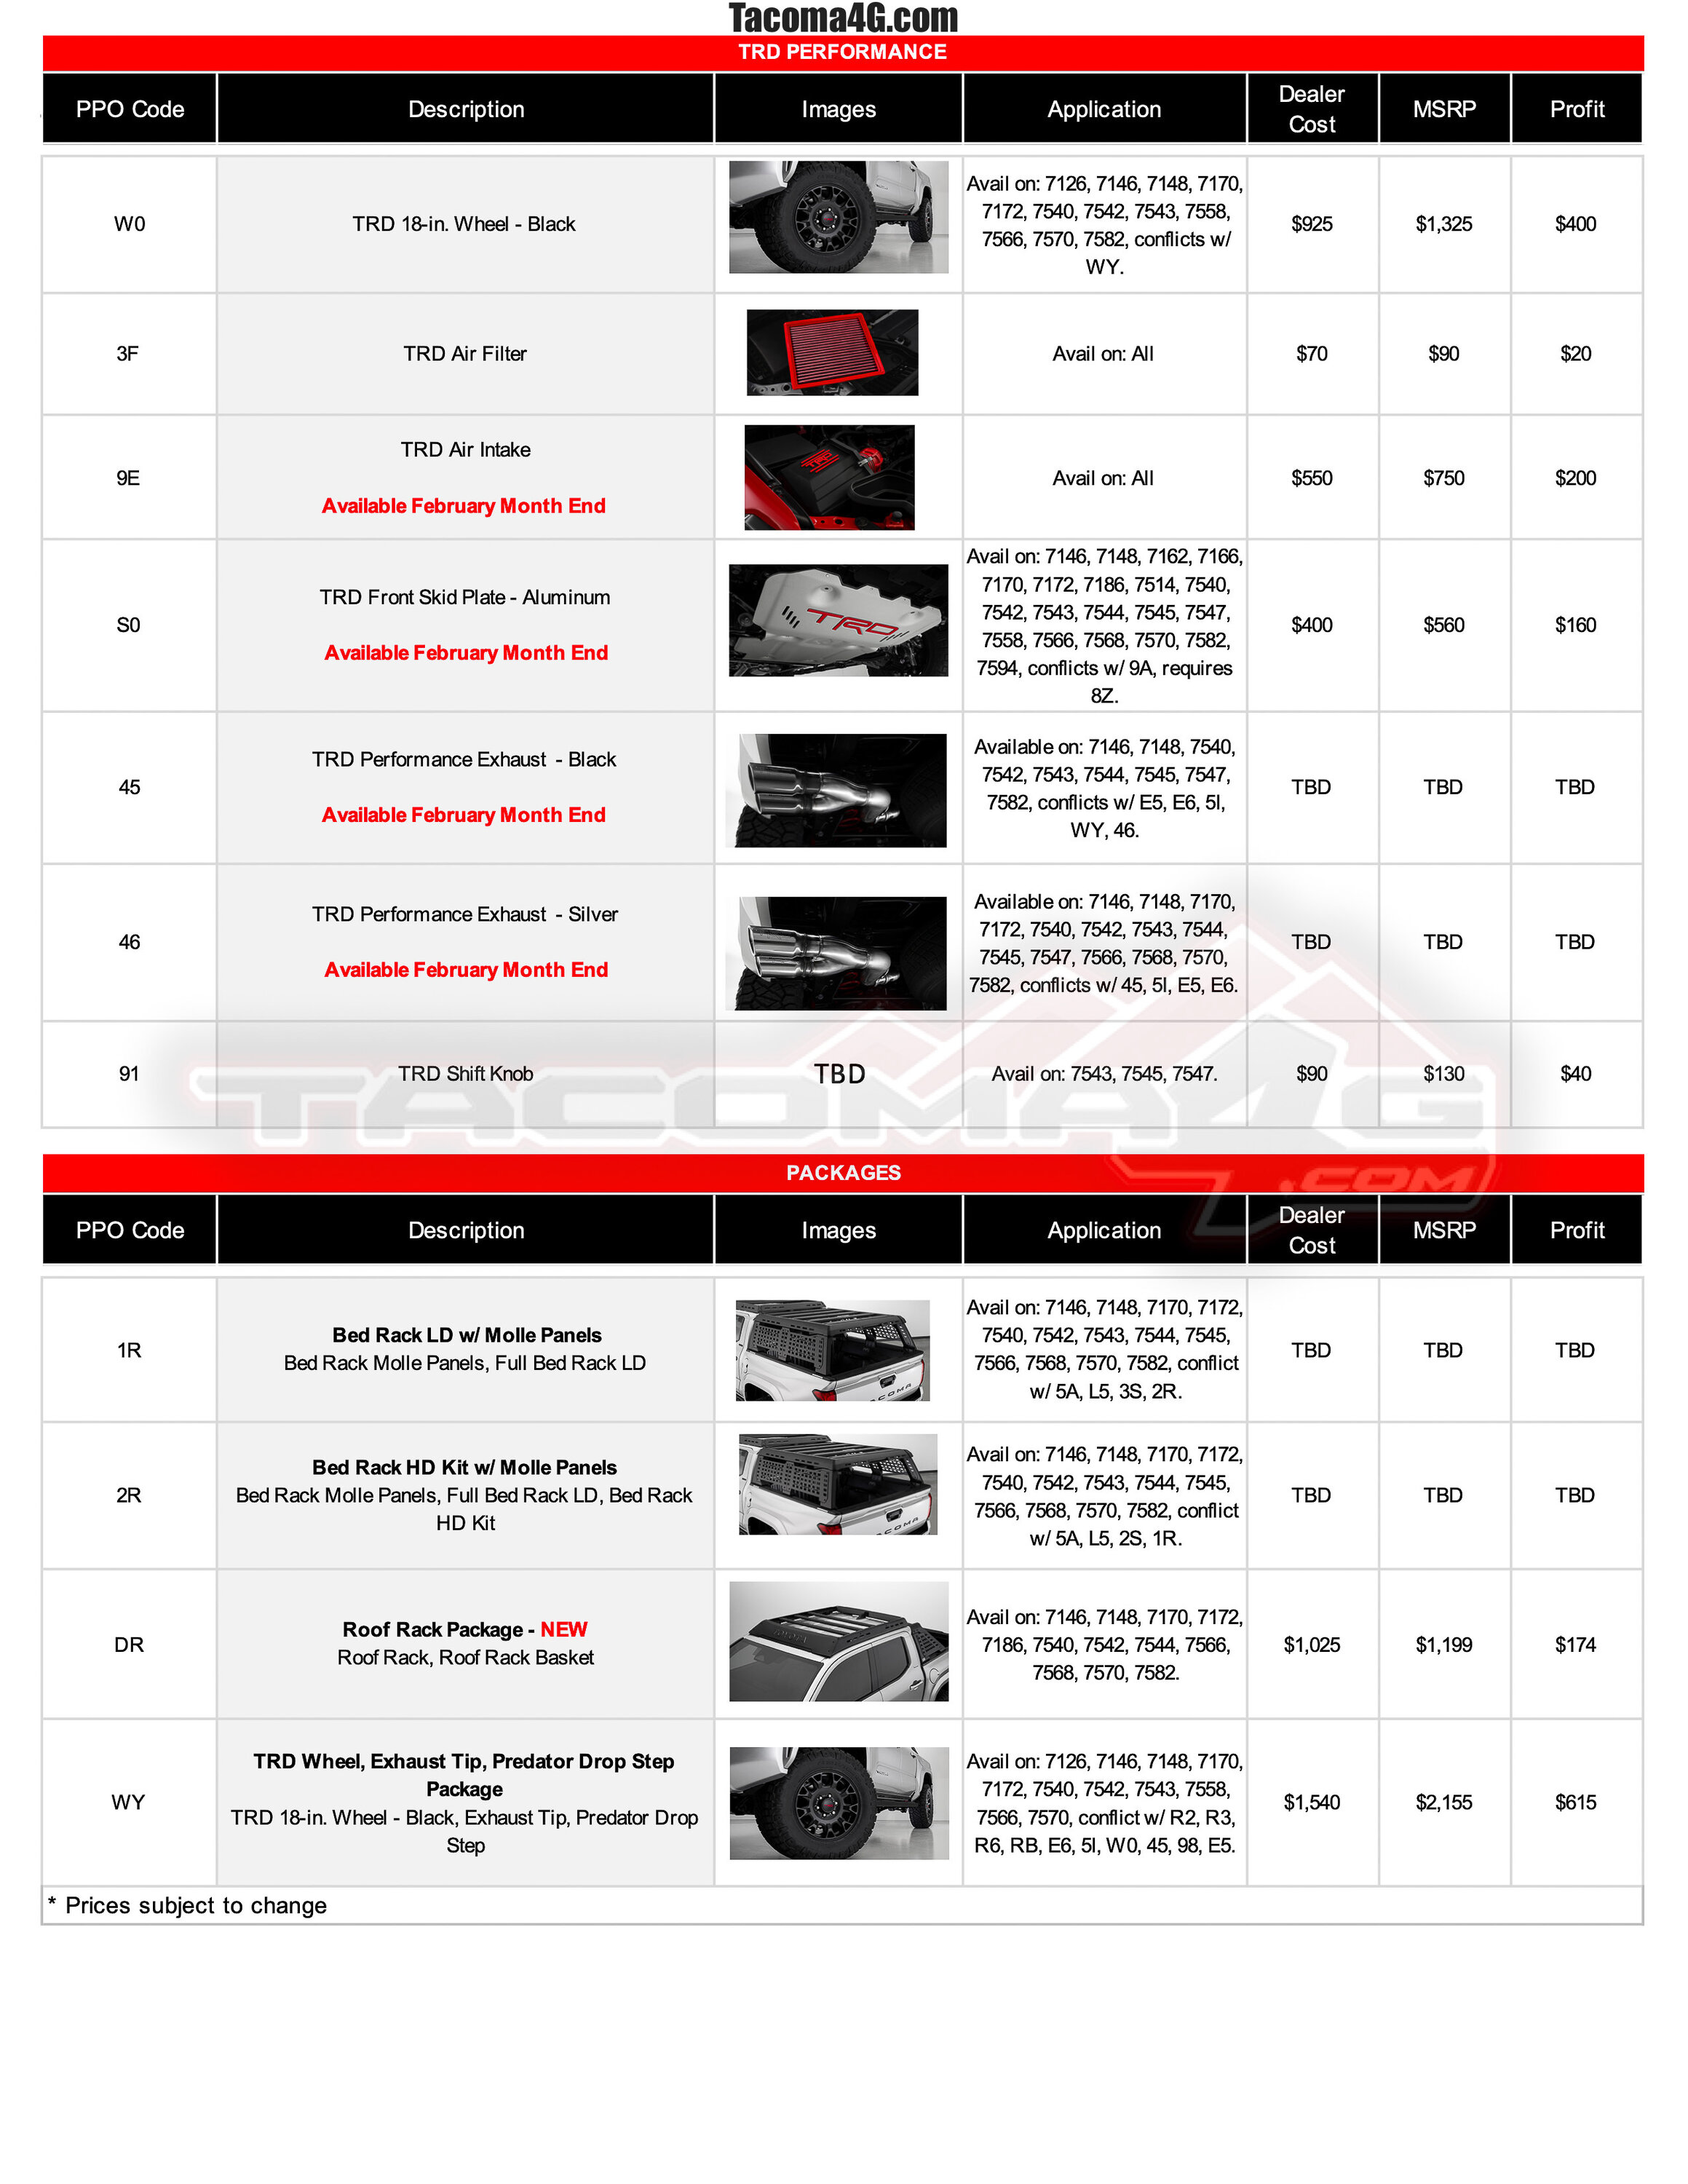 2024 Tacoma Any cold air intakes CAI yet for 2.4L Tacoma? 2024 Tacoma PPO Accessories Guide_02.09.24-6